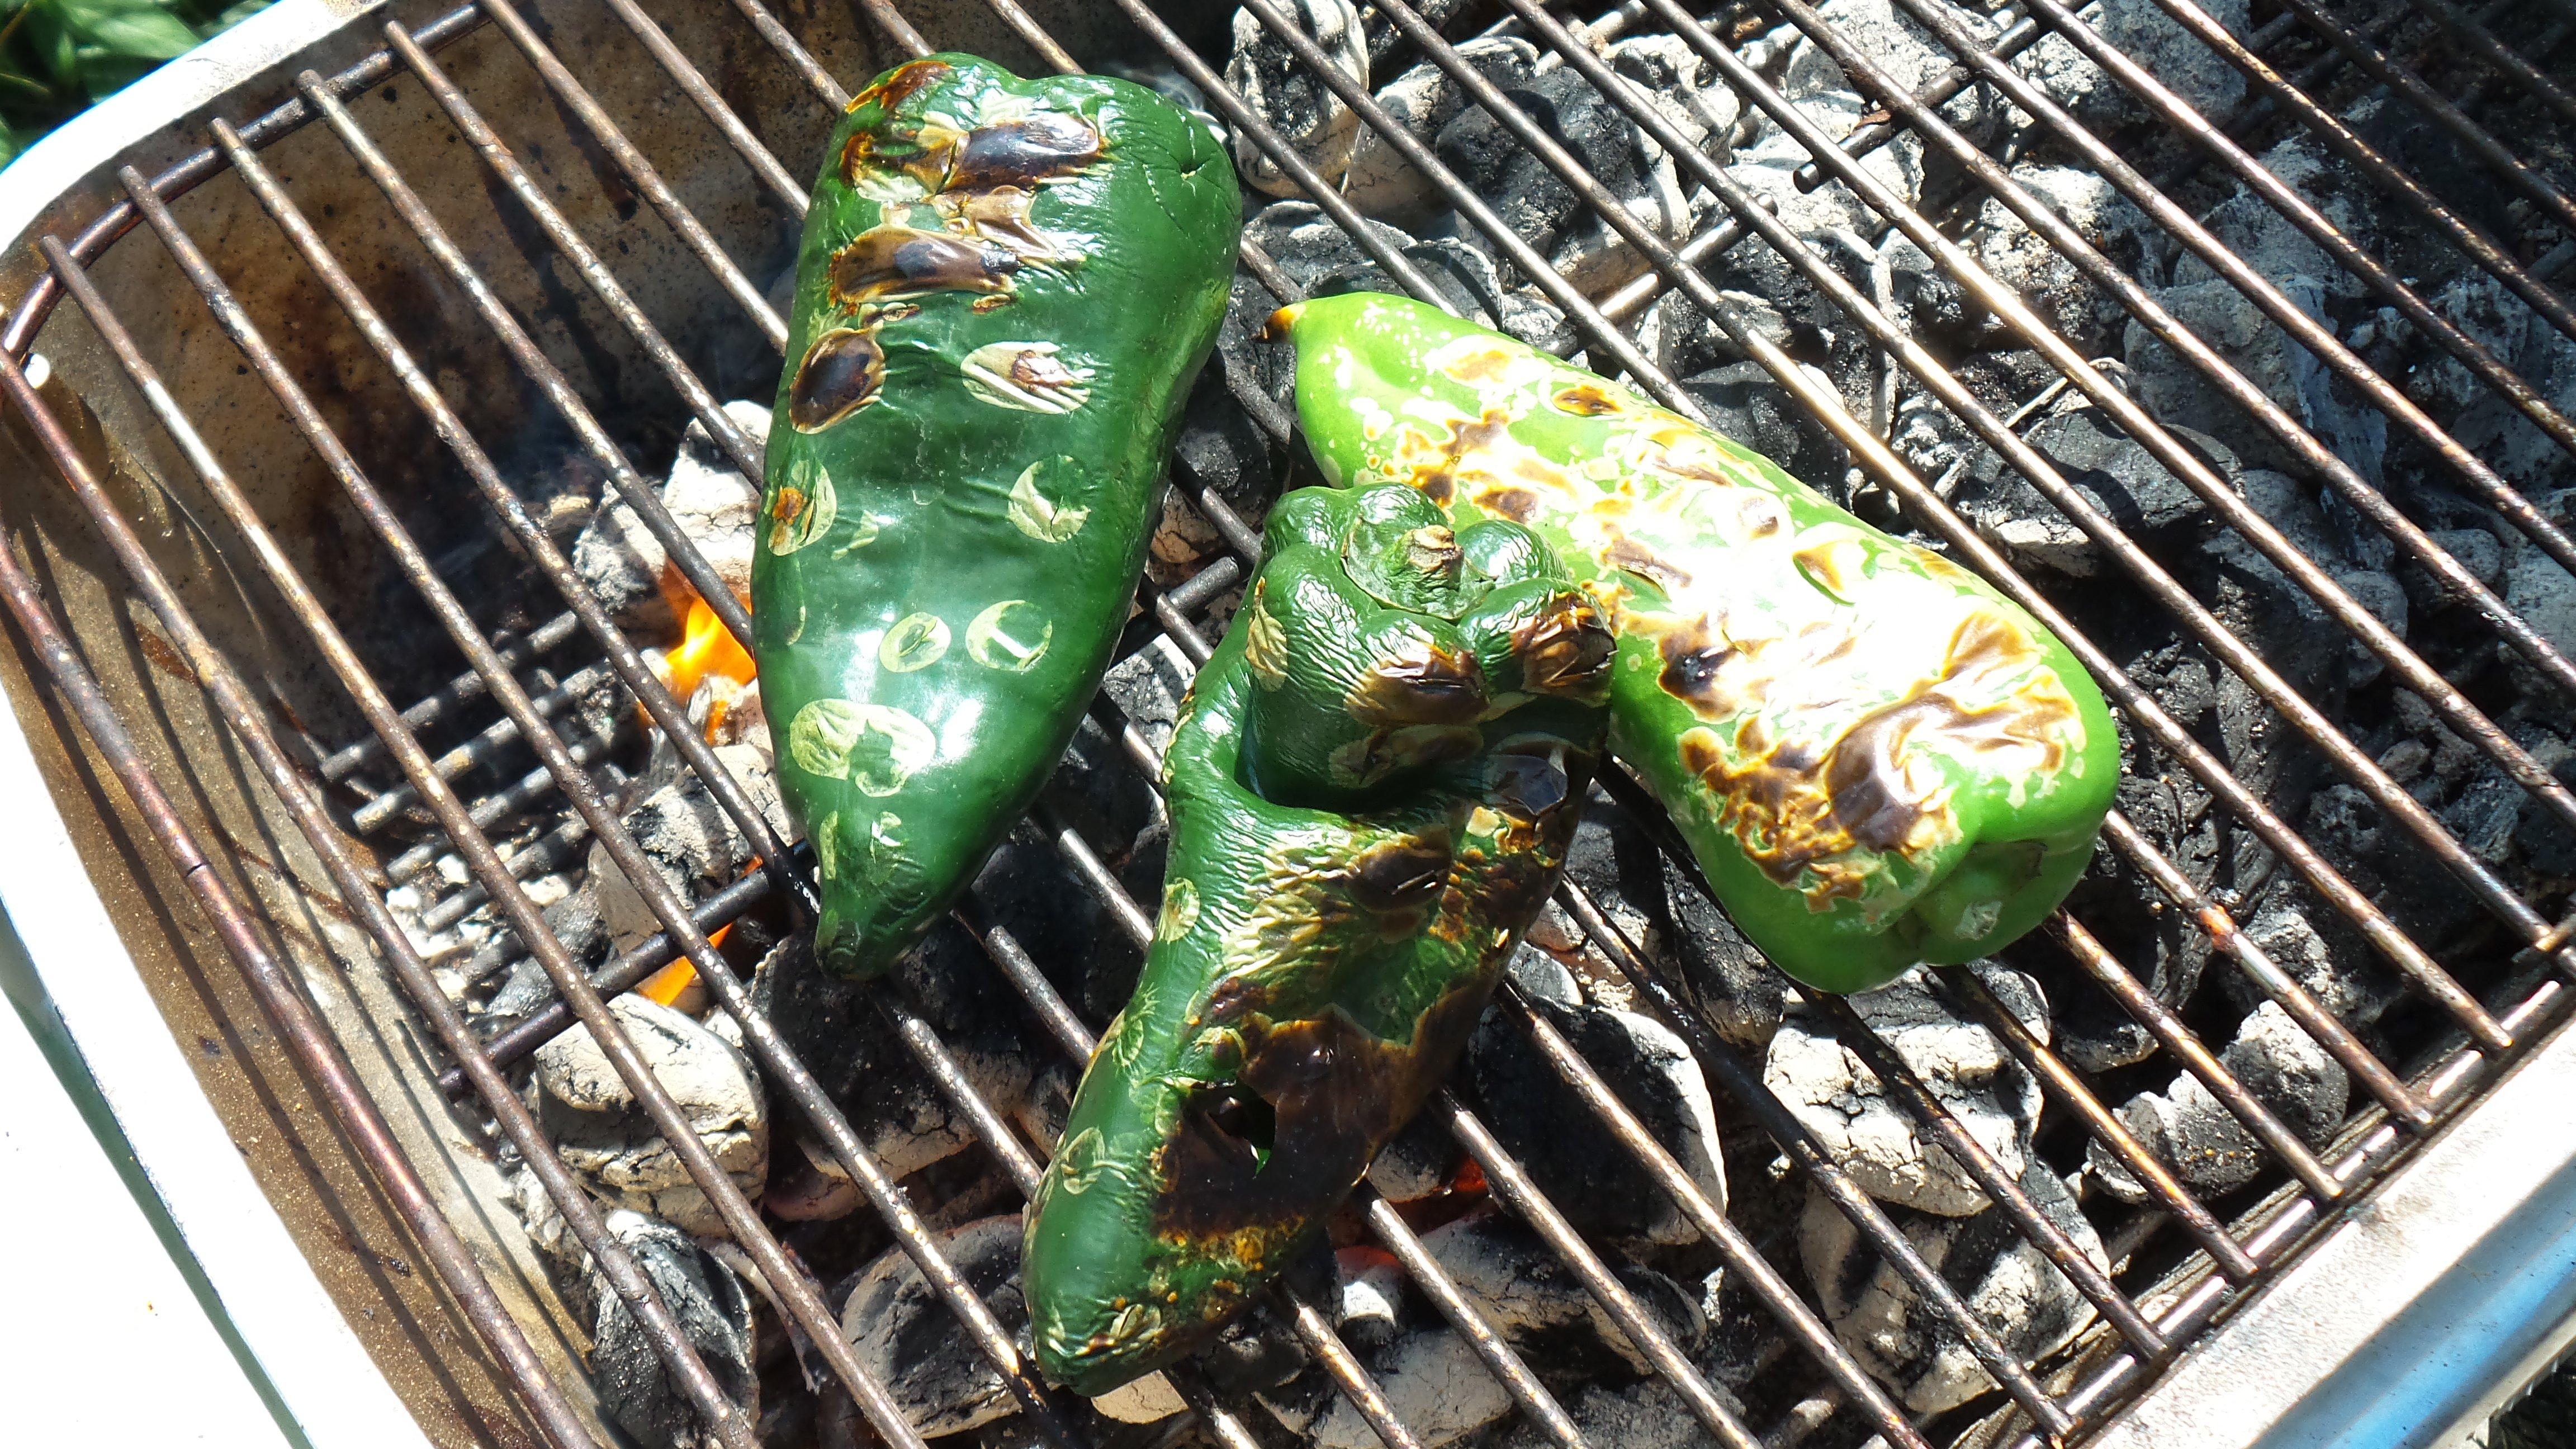 Roast the peppers over charcoal or gas flame then place in a sealed zip style bag to remove the skin.